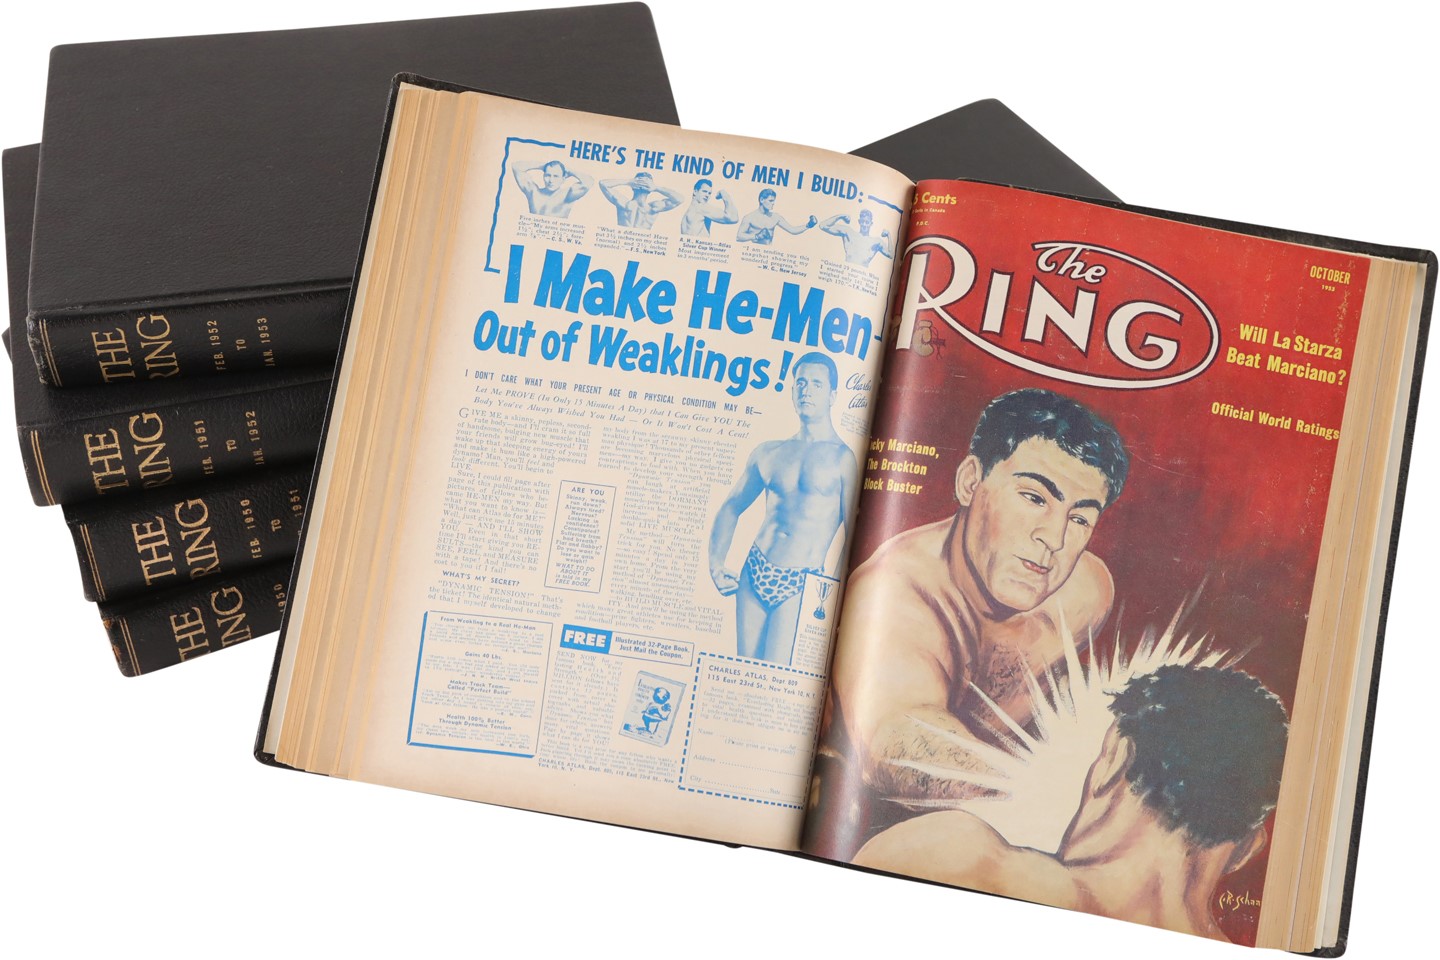 Muhammad Ali & Boxing - Collection of The Ring Boxing Magazine Bound Volumes from the 1950s Including (1) Autograph (7)